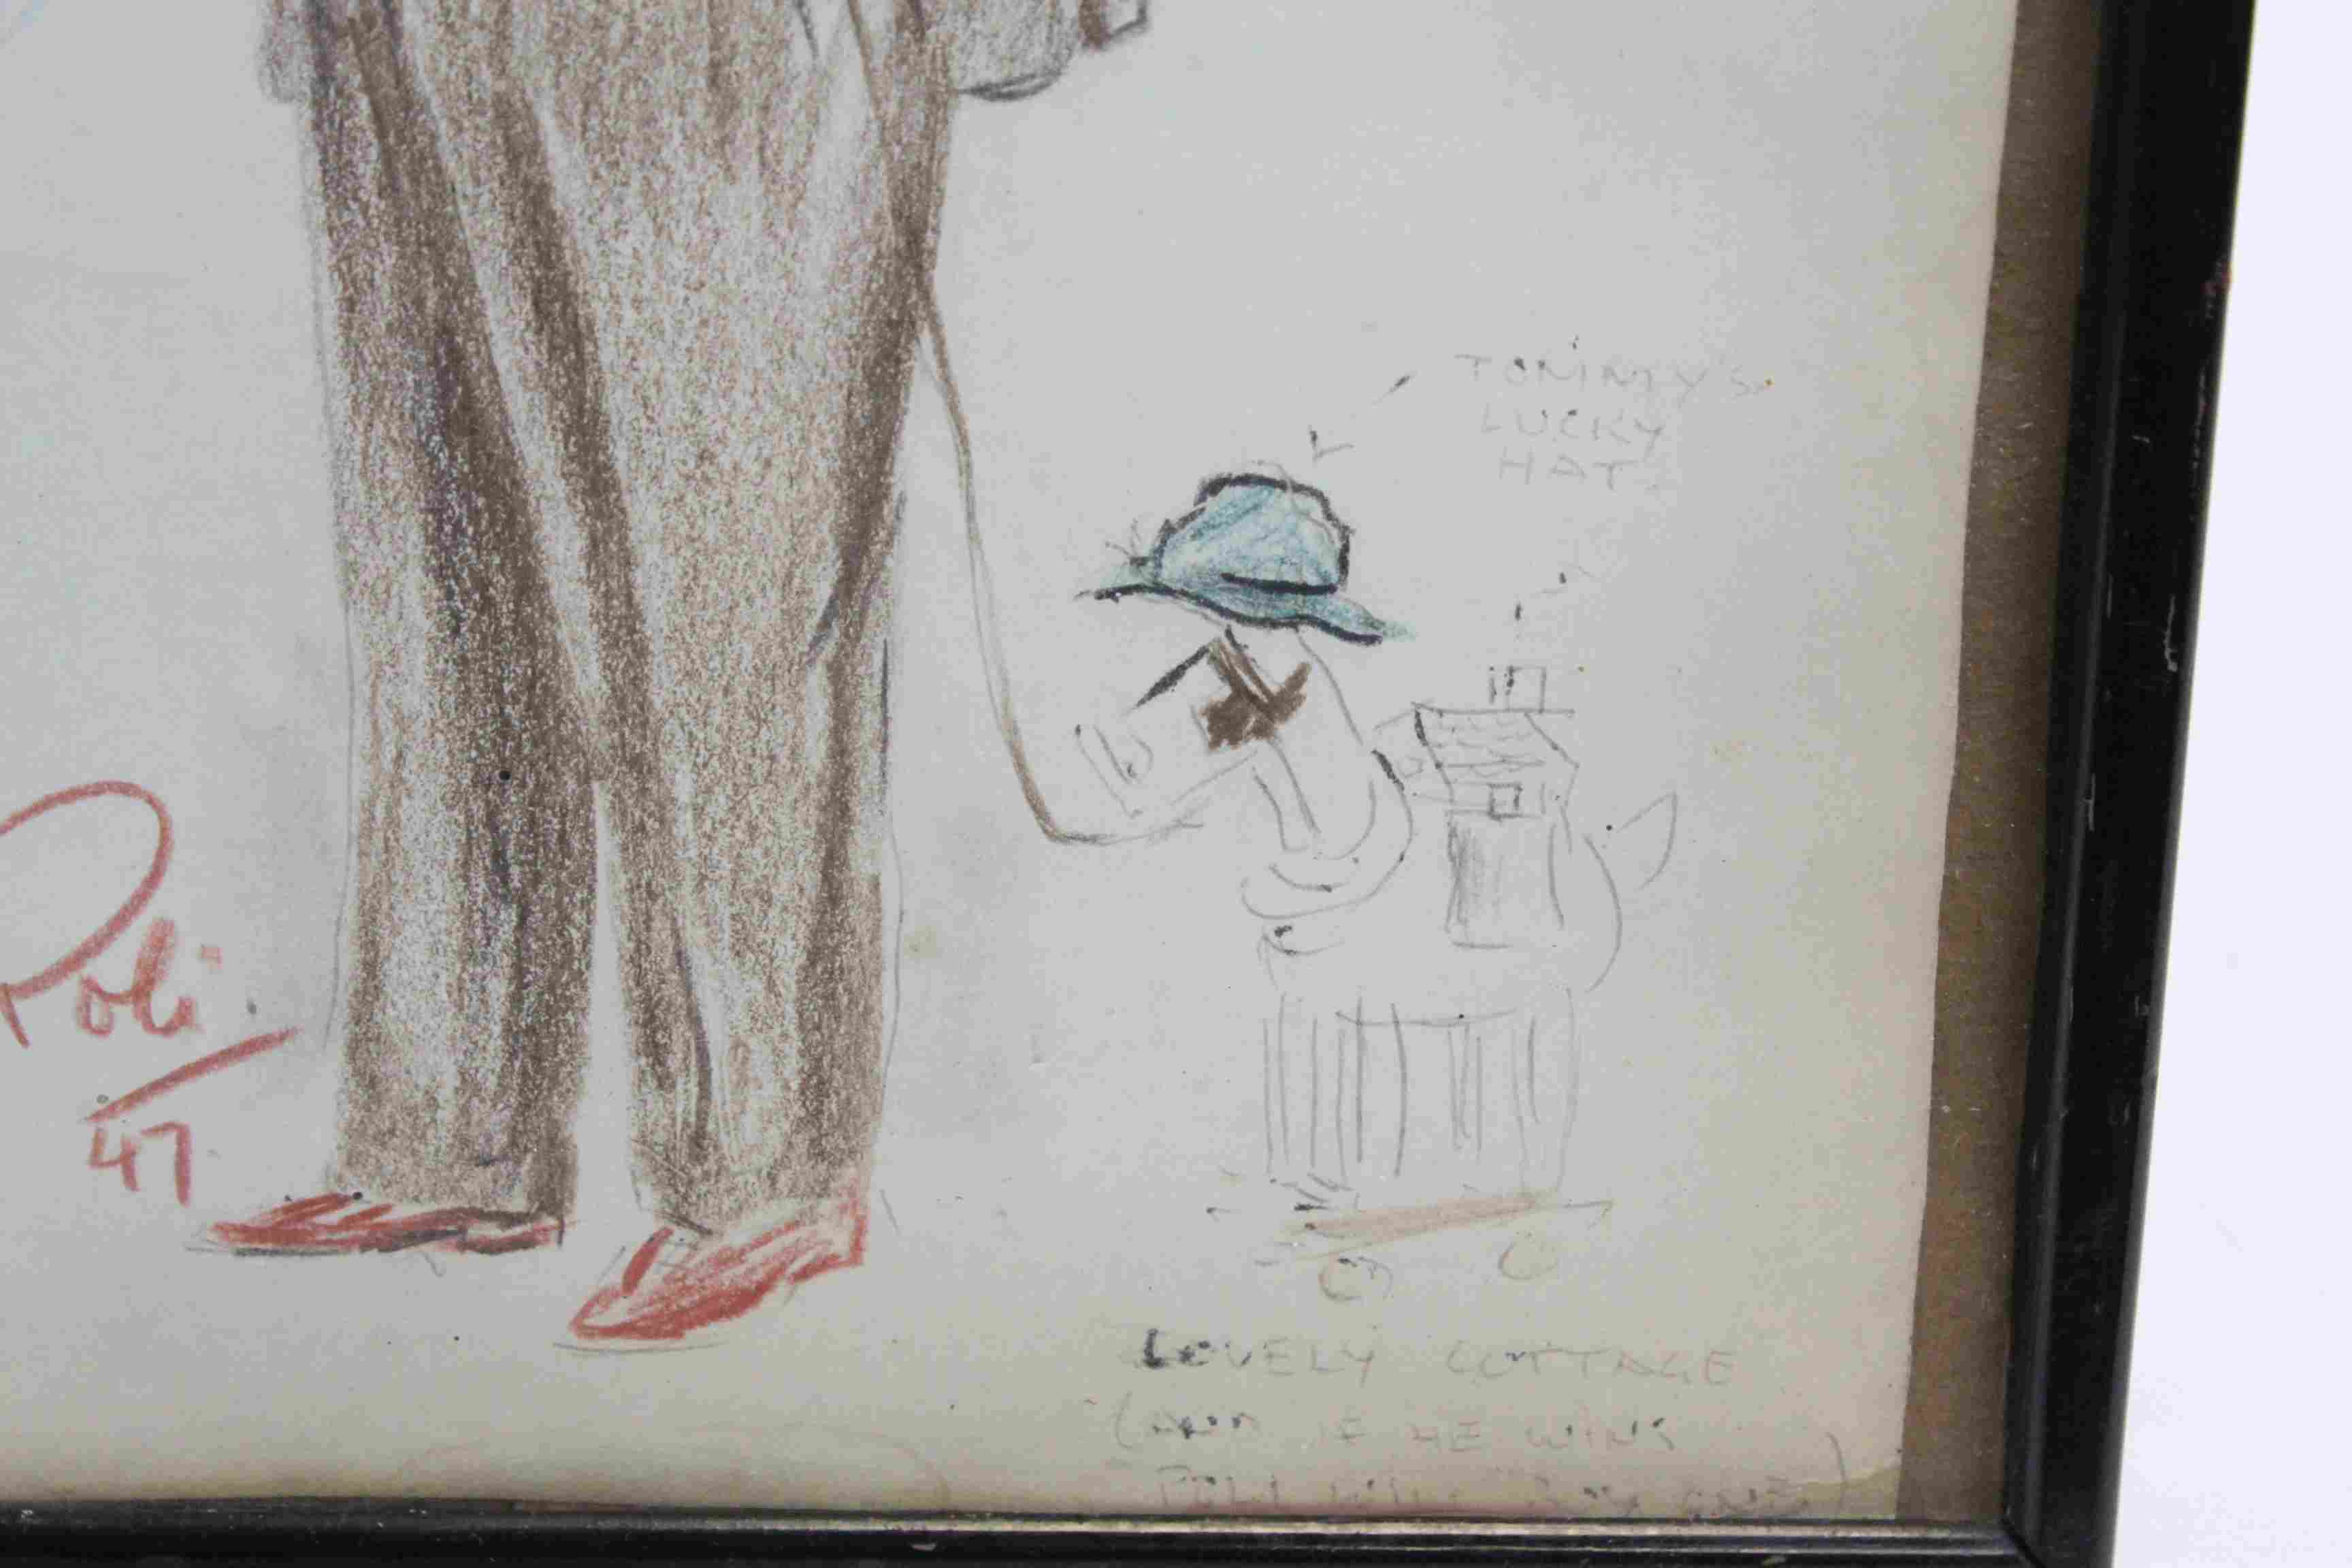 Framed and glazed Humorous sketch of Horse Trainer "Tommy Rayson" & signed "Poli '47" - Image 3 of 5